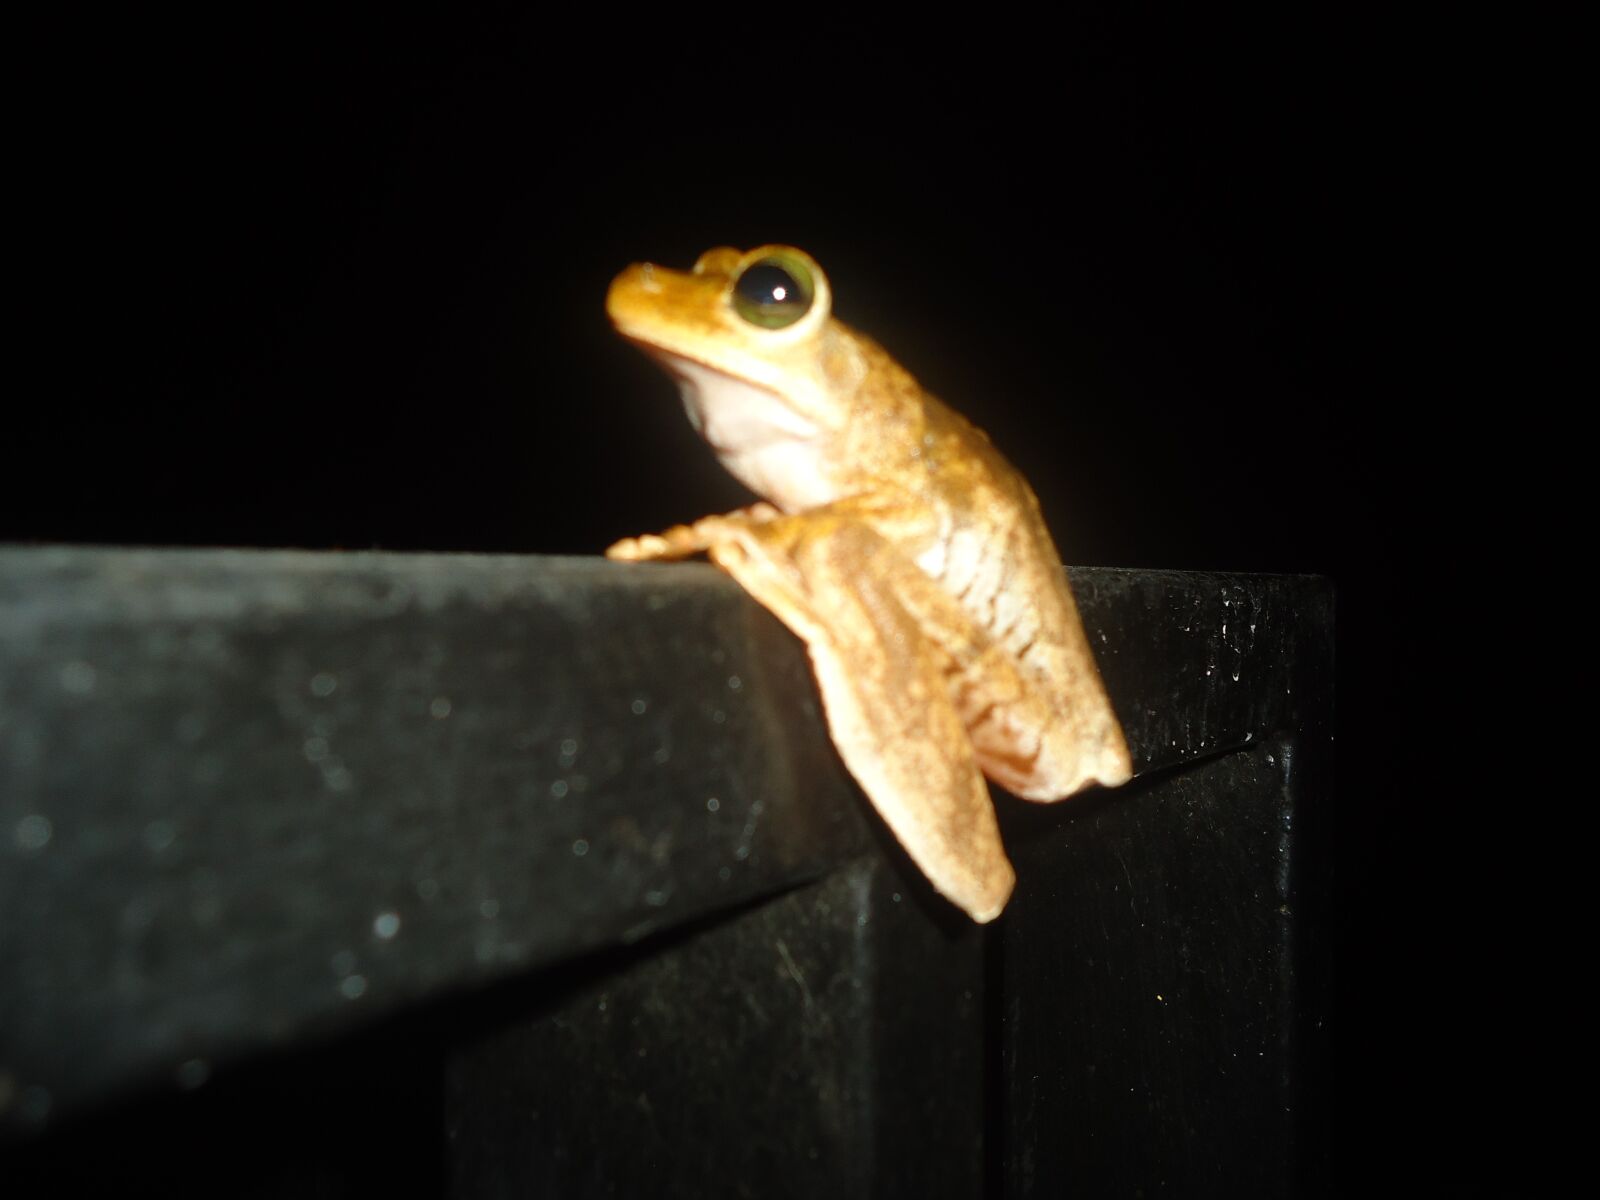 Sony Cyber-shot DSC-W320 sample photo. Nature, frog, night photography